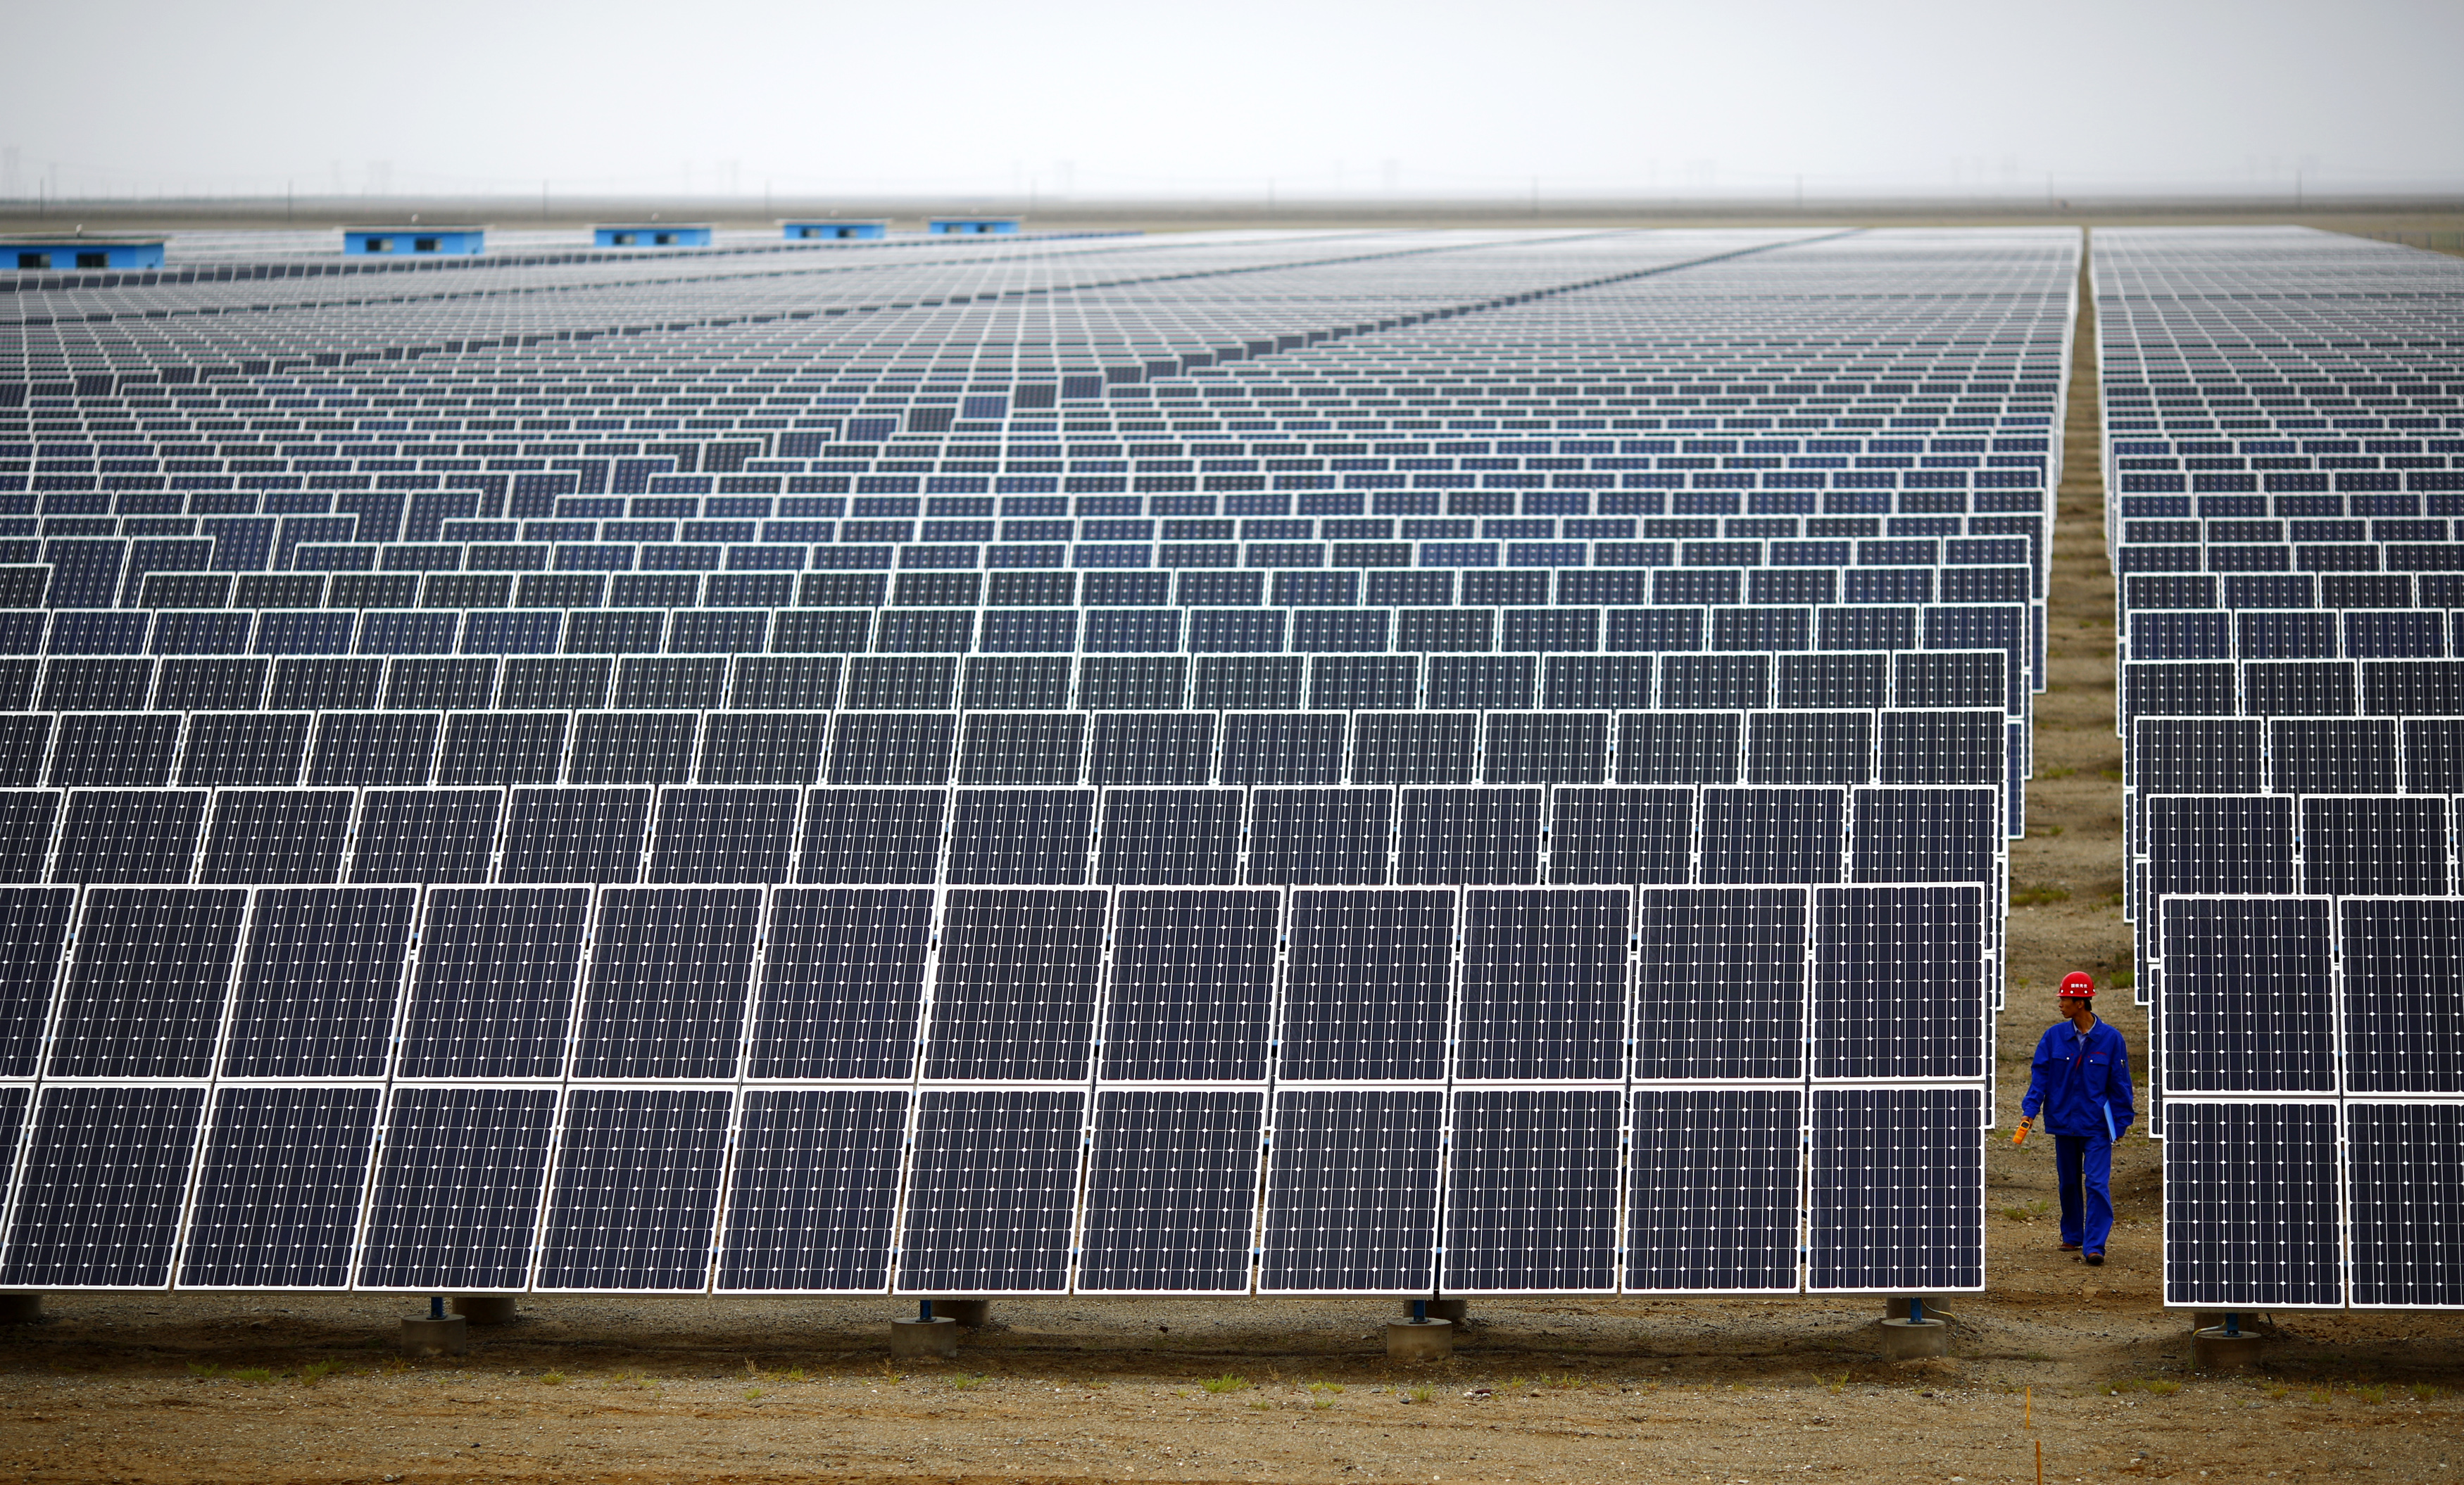 A worker inspects solar panels at a solar farm in Dunhuang, 950km northwest of Lanzhou, Gansu Province